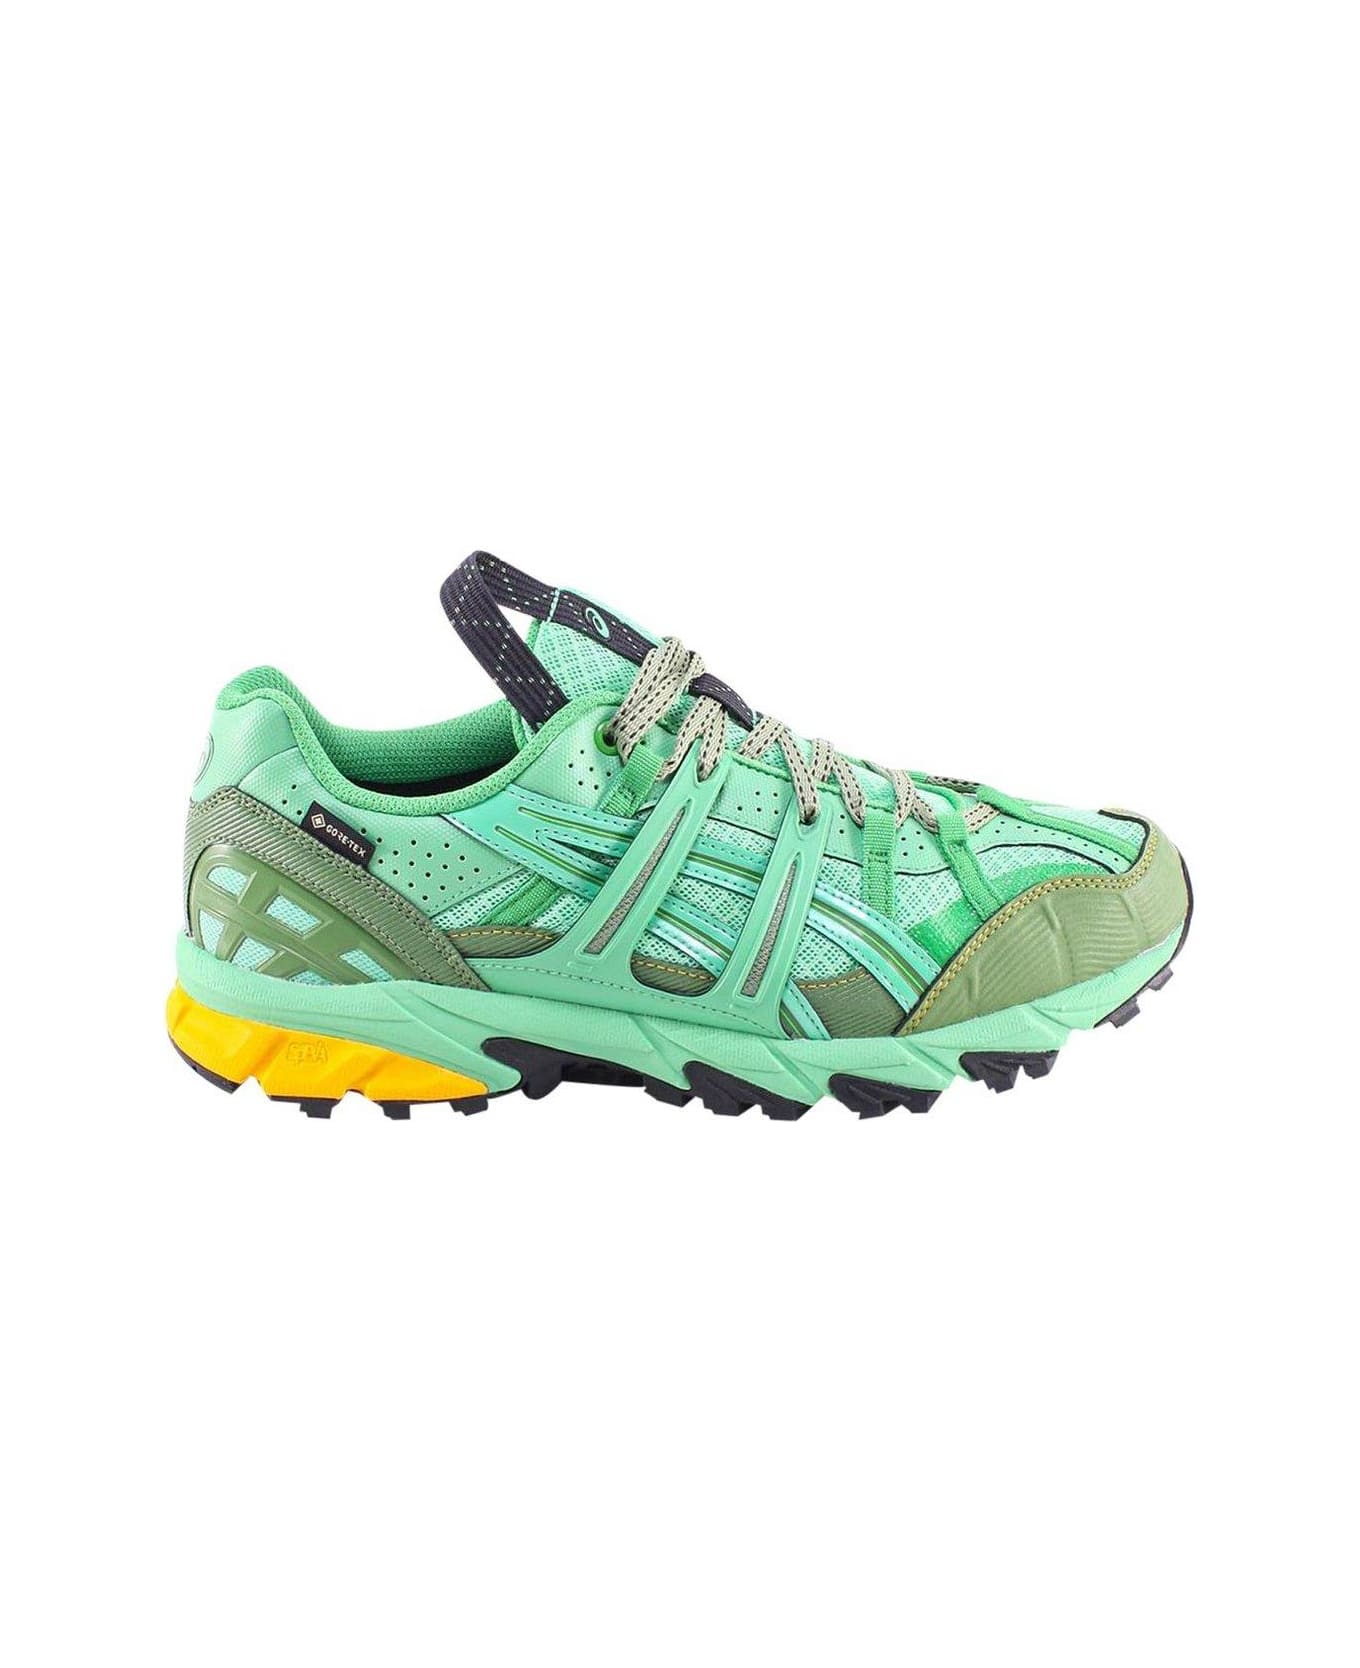 Asics Hs4-s Gel-sonoma Lace-up Sneakers - Green